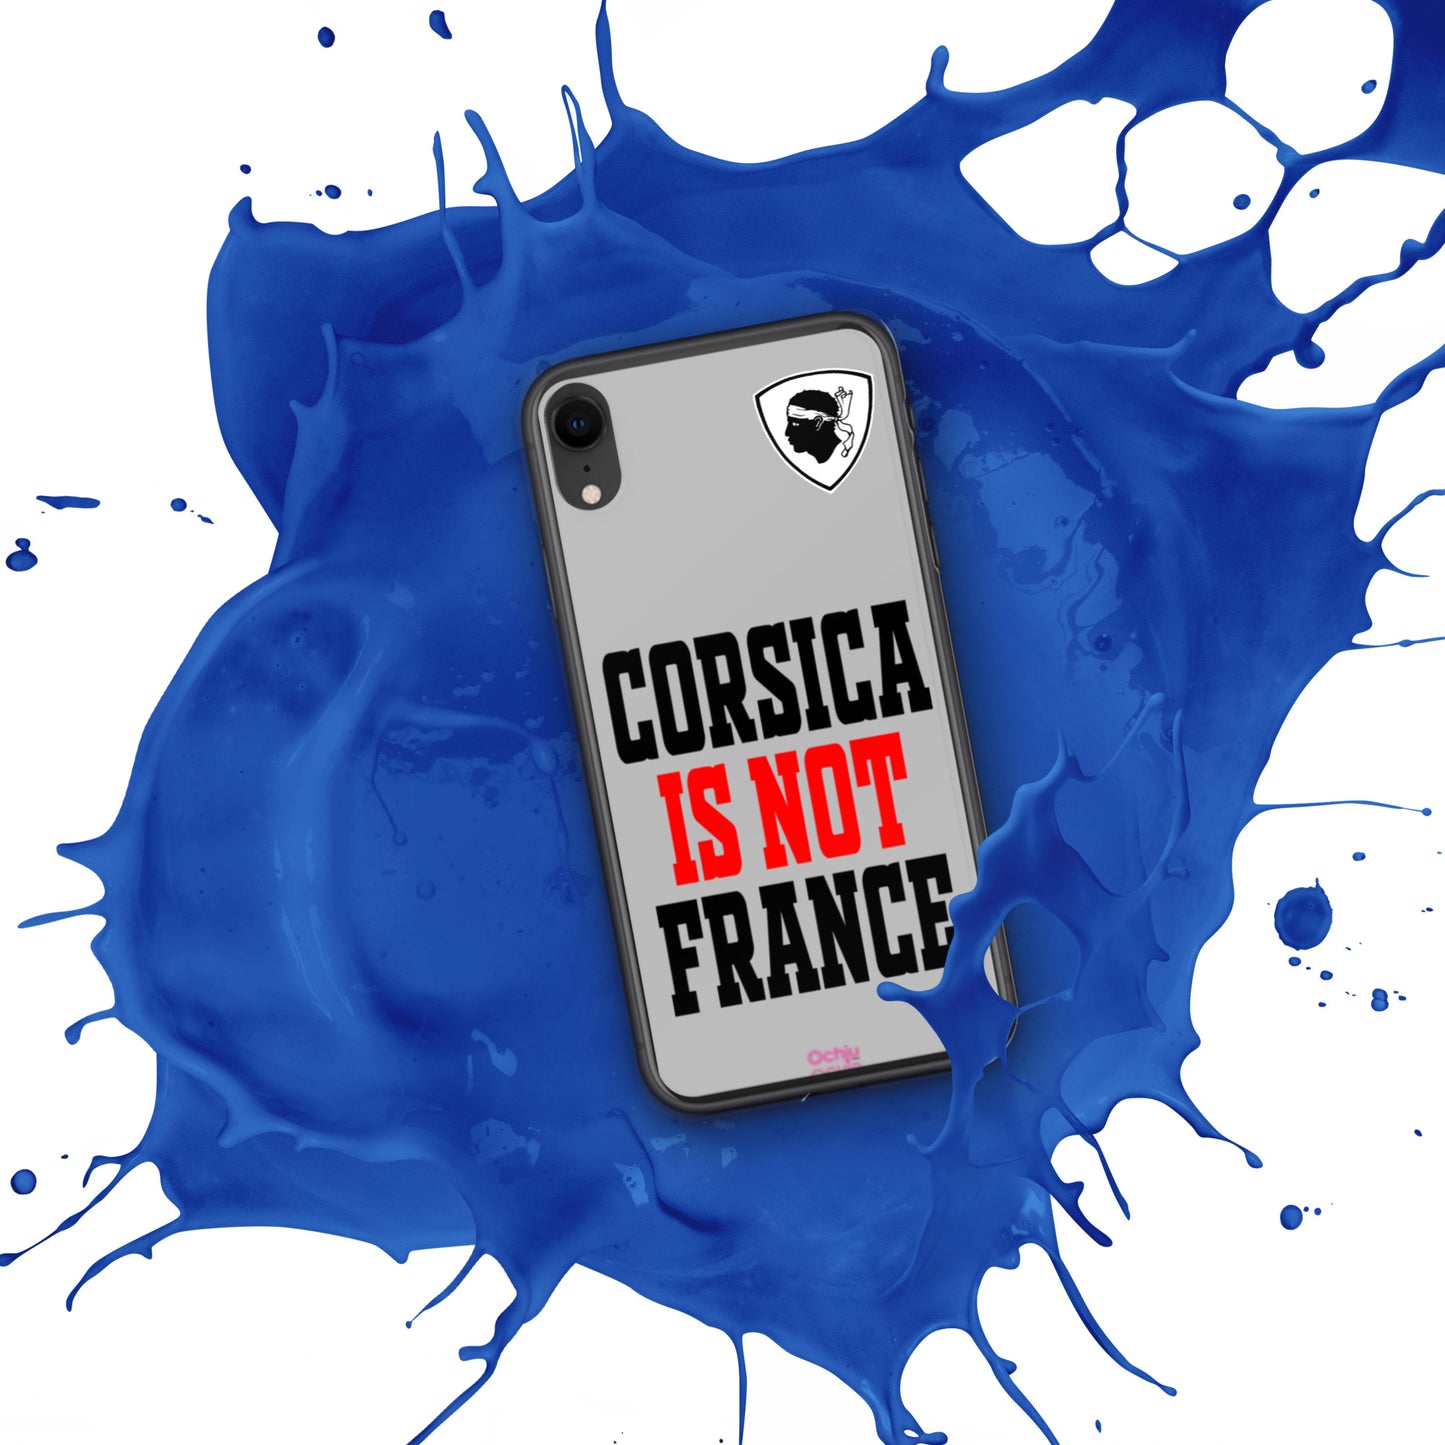 Coque pour iPhone Corsica is not France - Ochju Ochju iPhone XR Ochju Coque pour iPhone Corsica is not France